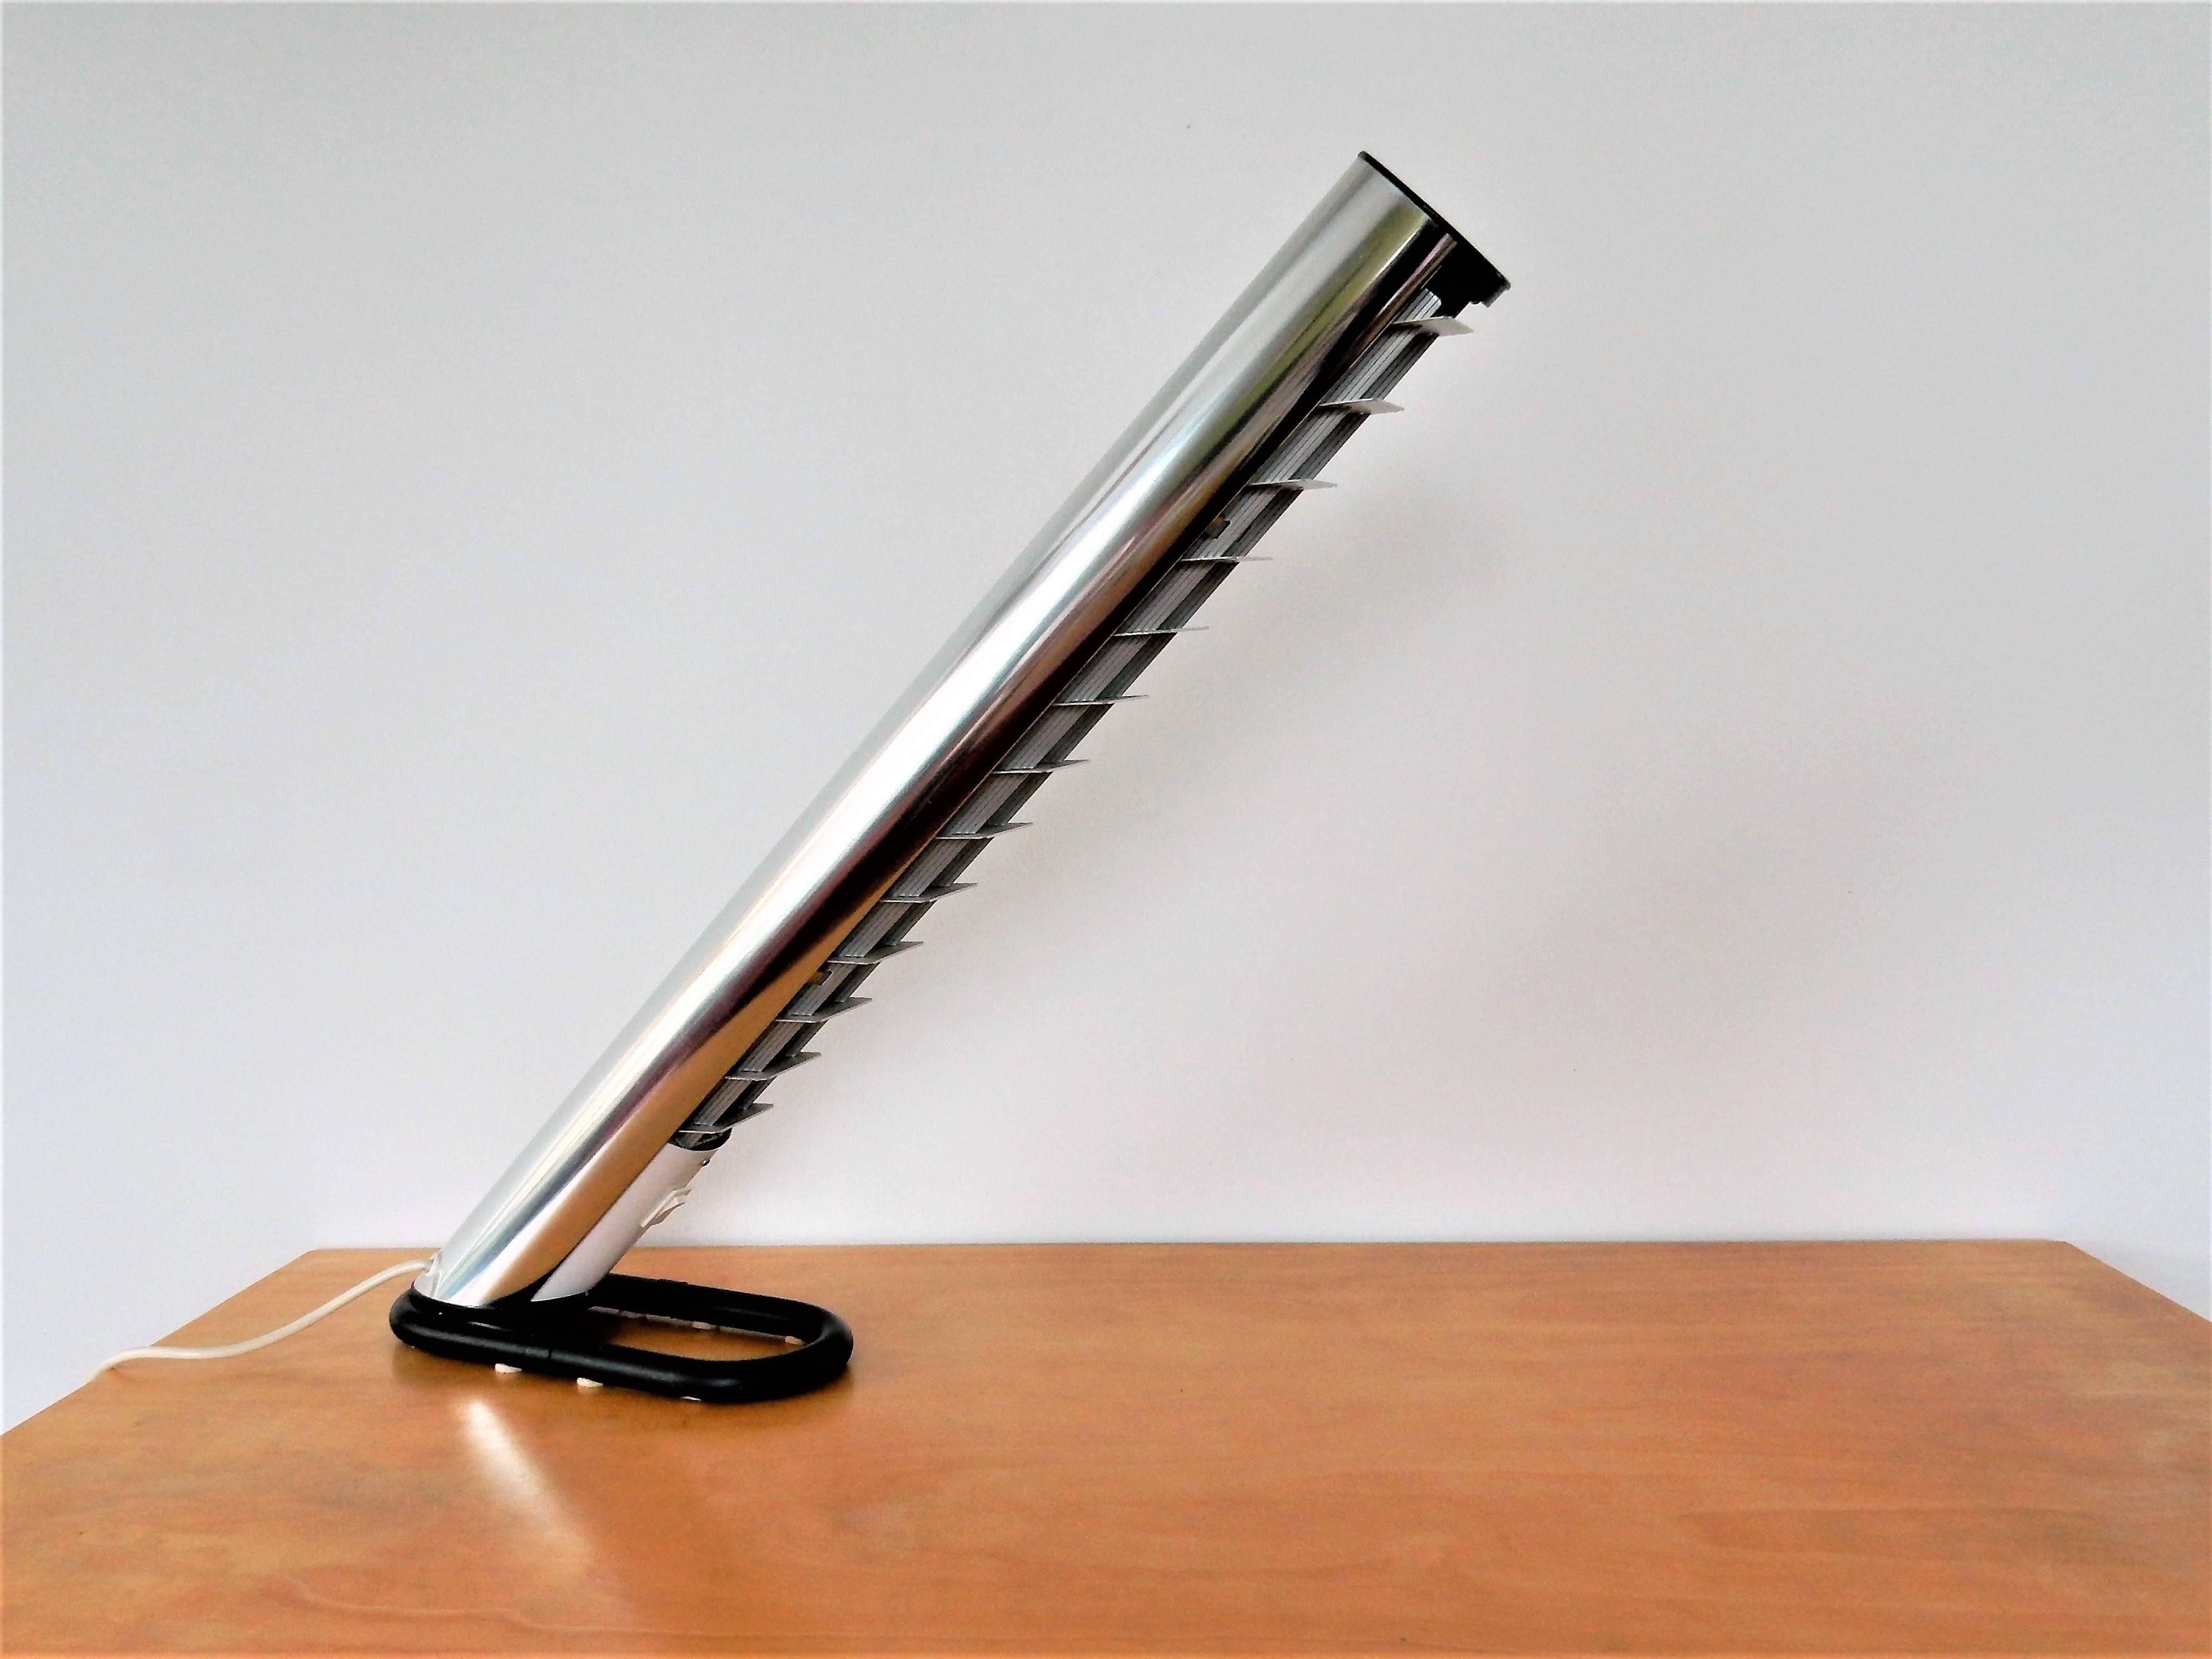 This very nice and futuristic-looking desk lamp was designed by Göran Pehrson in 1978 for Ateljé Lyktan in Sweden. The lamp shows a tube shaped pipe with one fluorescent bulb. The metal diffuser enables one to position the light more down or